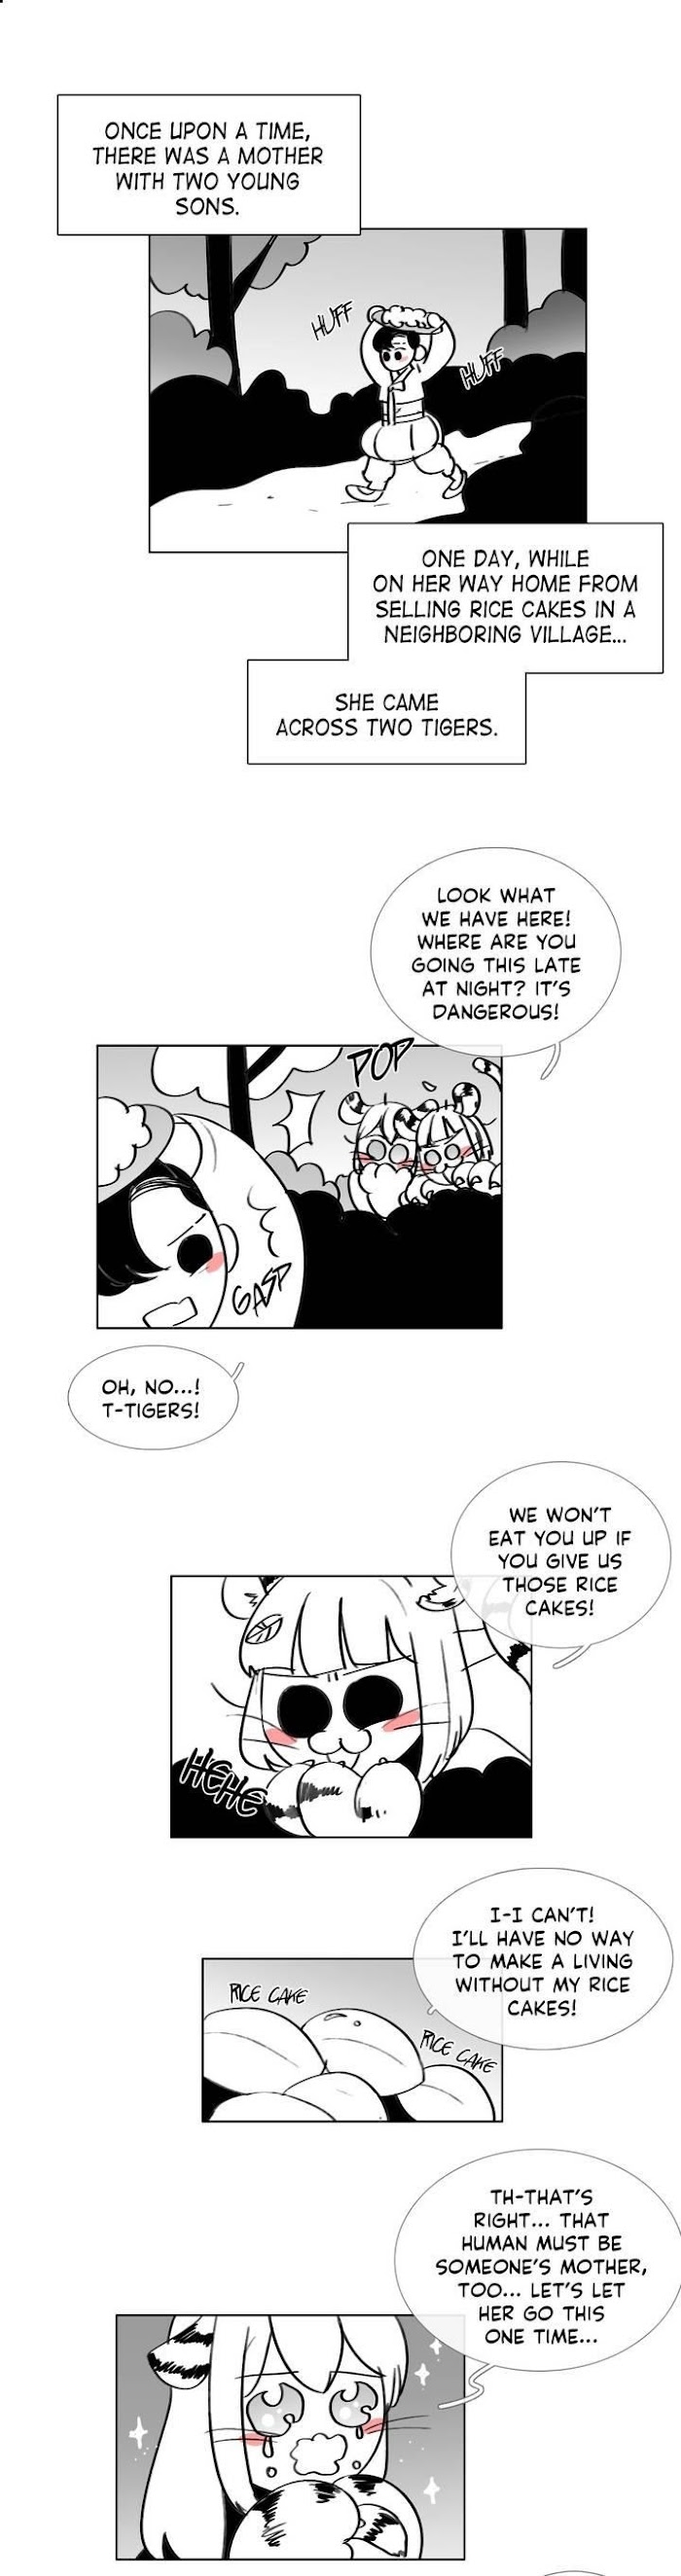 Talk To Me - Page 1